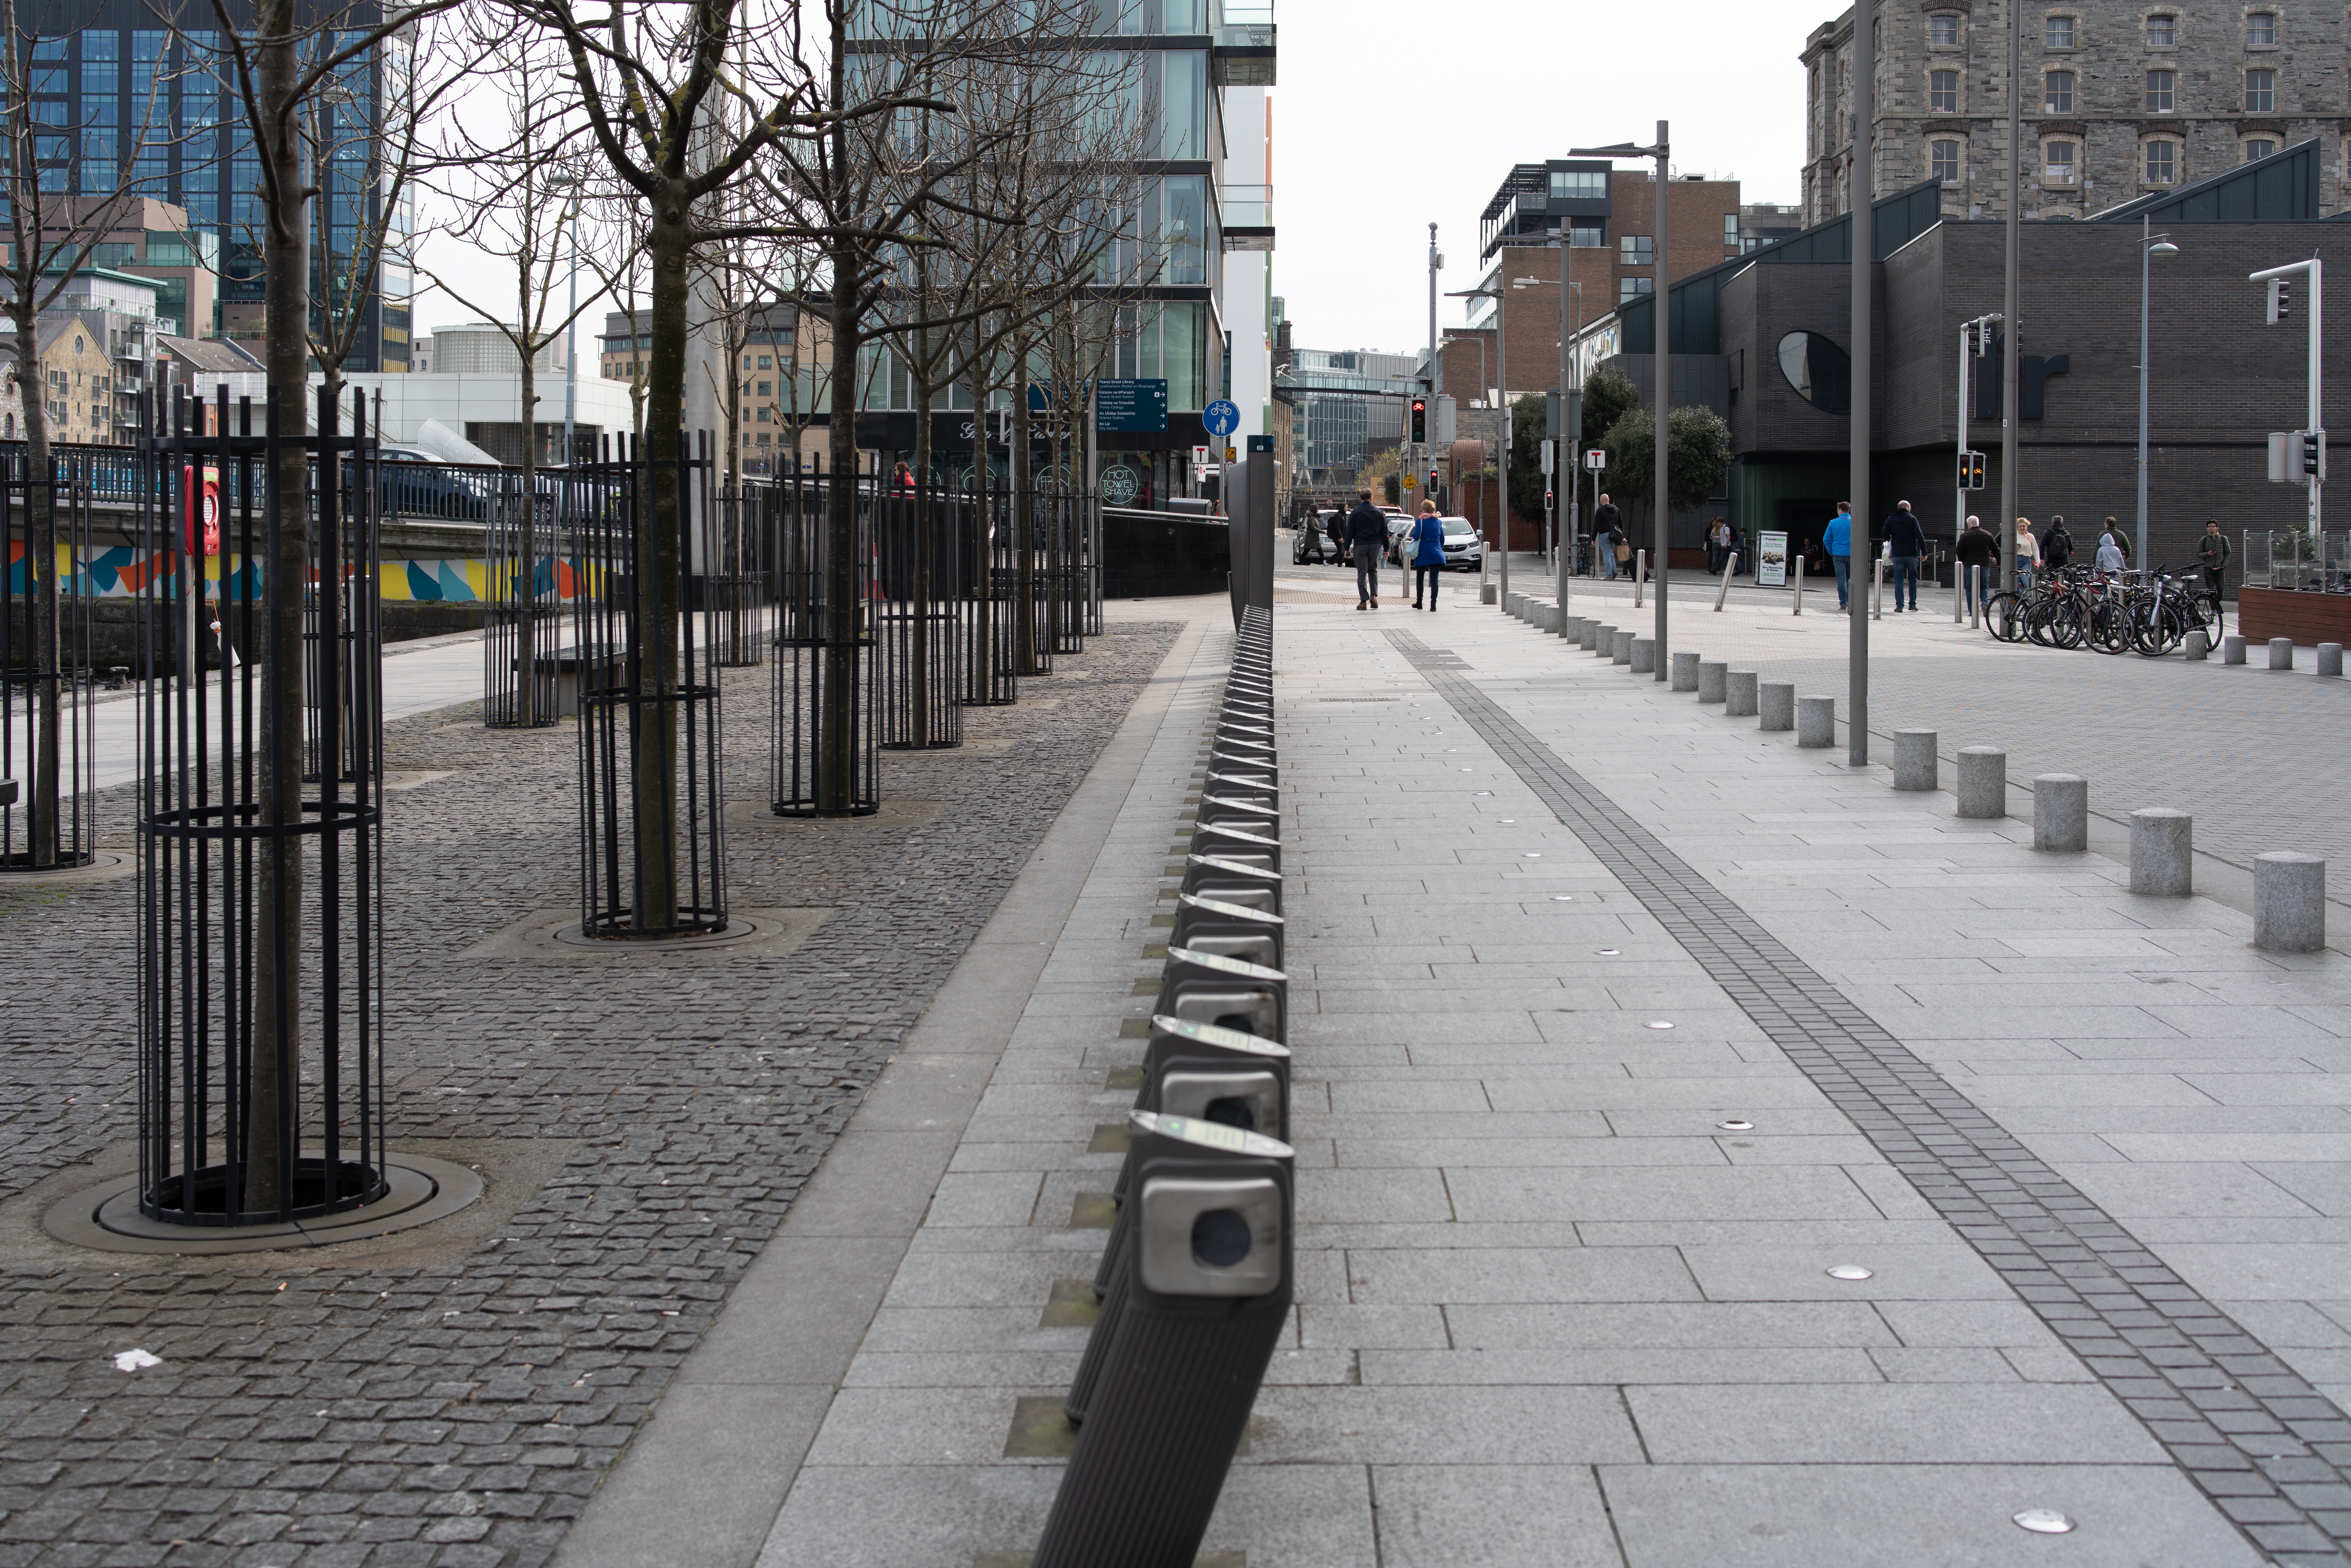  GRAND CANAL SQUARE 005 